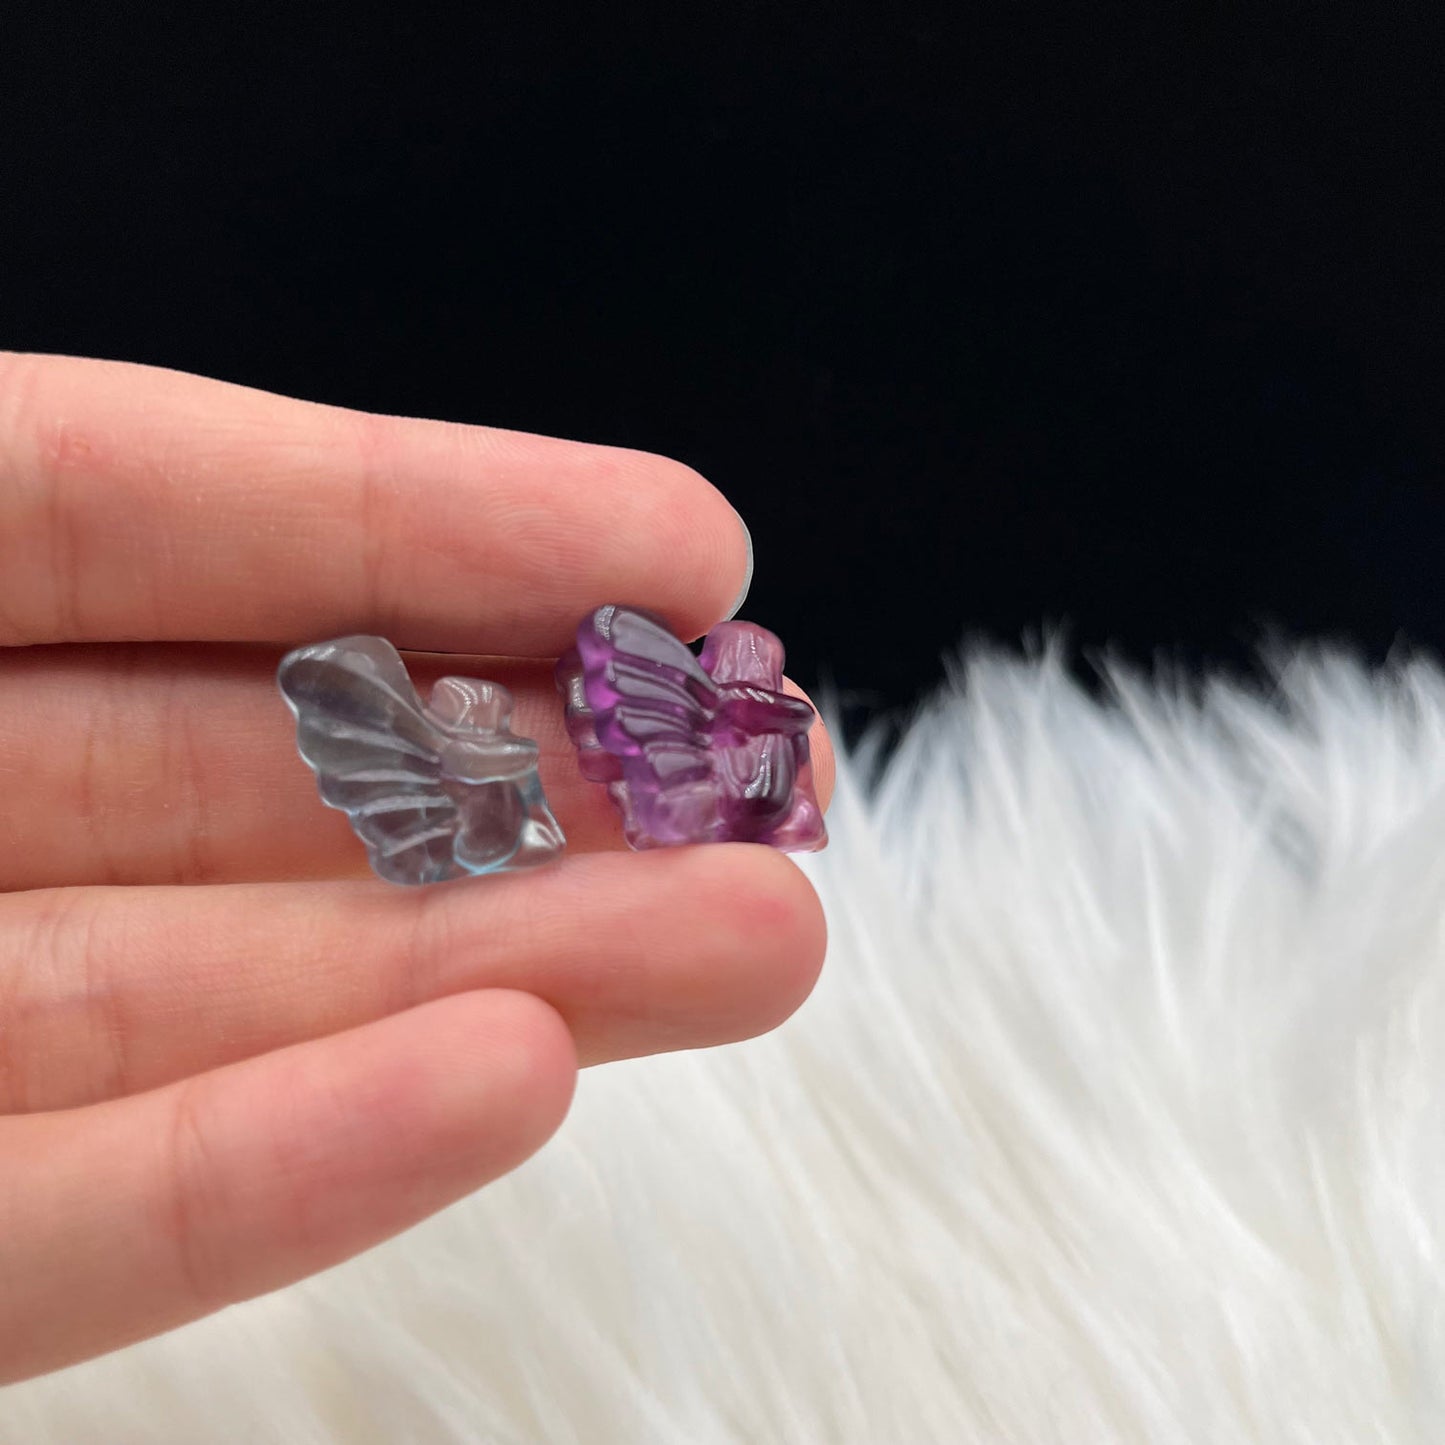 Mini Fluorite Crystal with Body Shark and Squirrel design, size 51